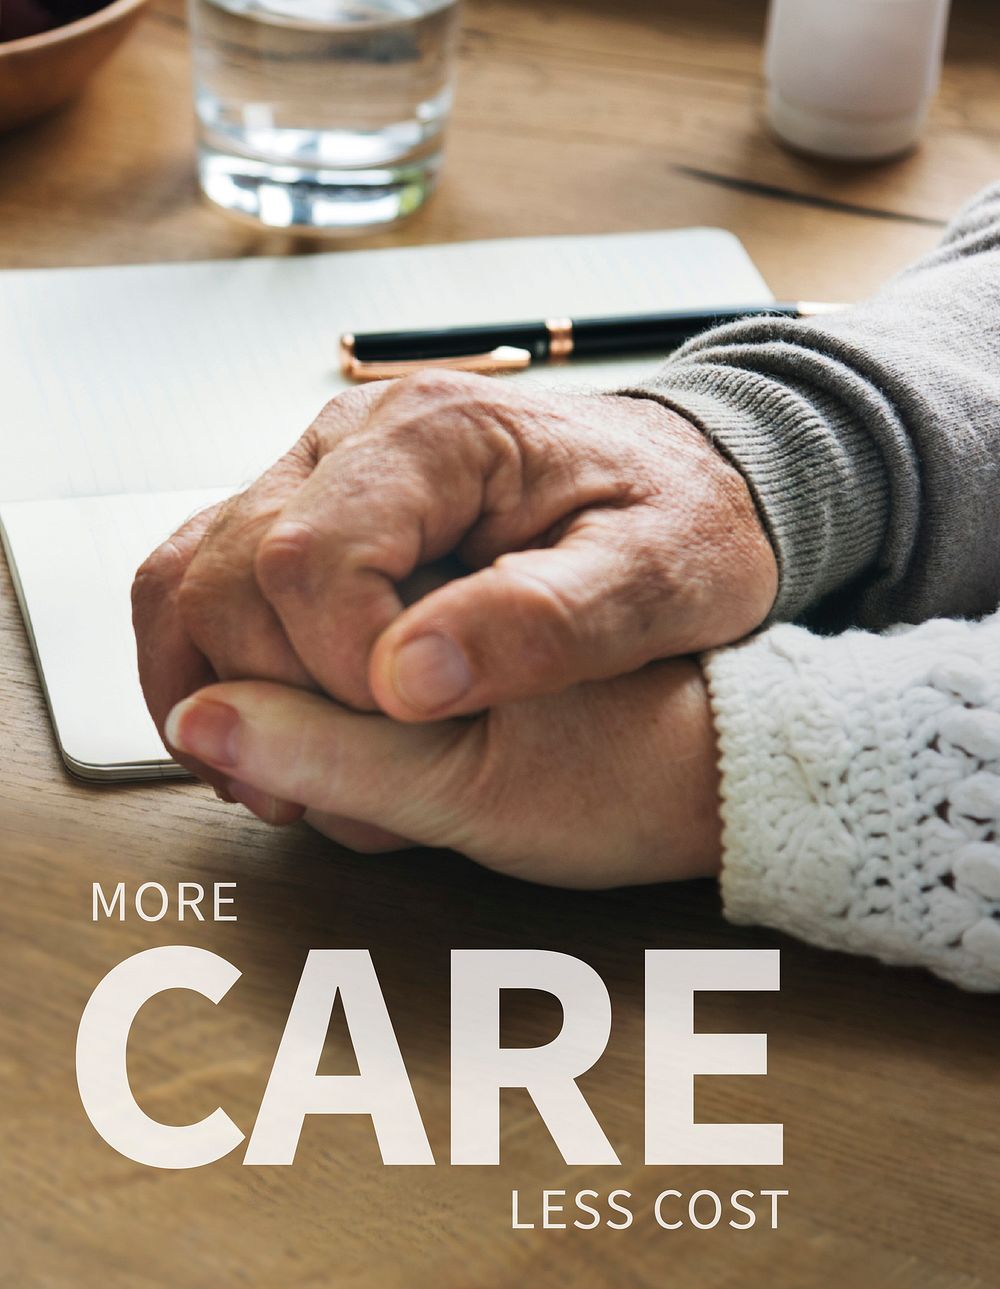 Personal life insurance more care less cost ad poster